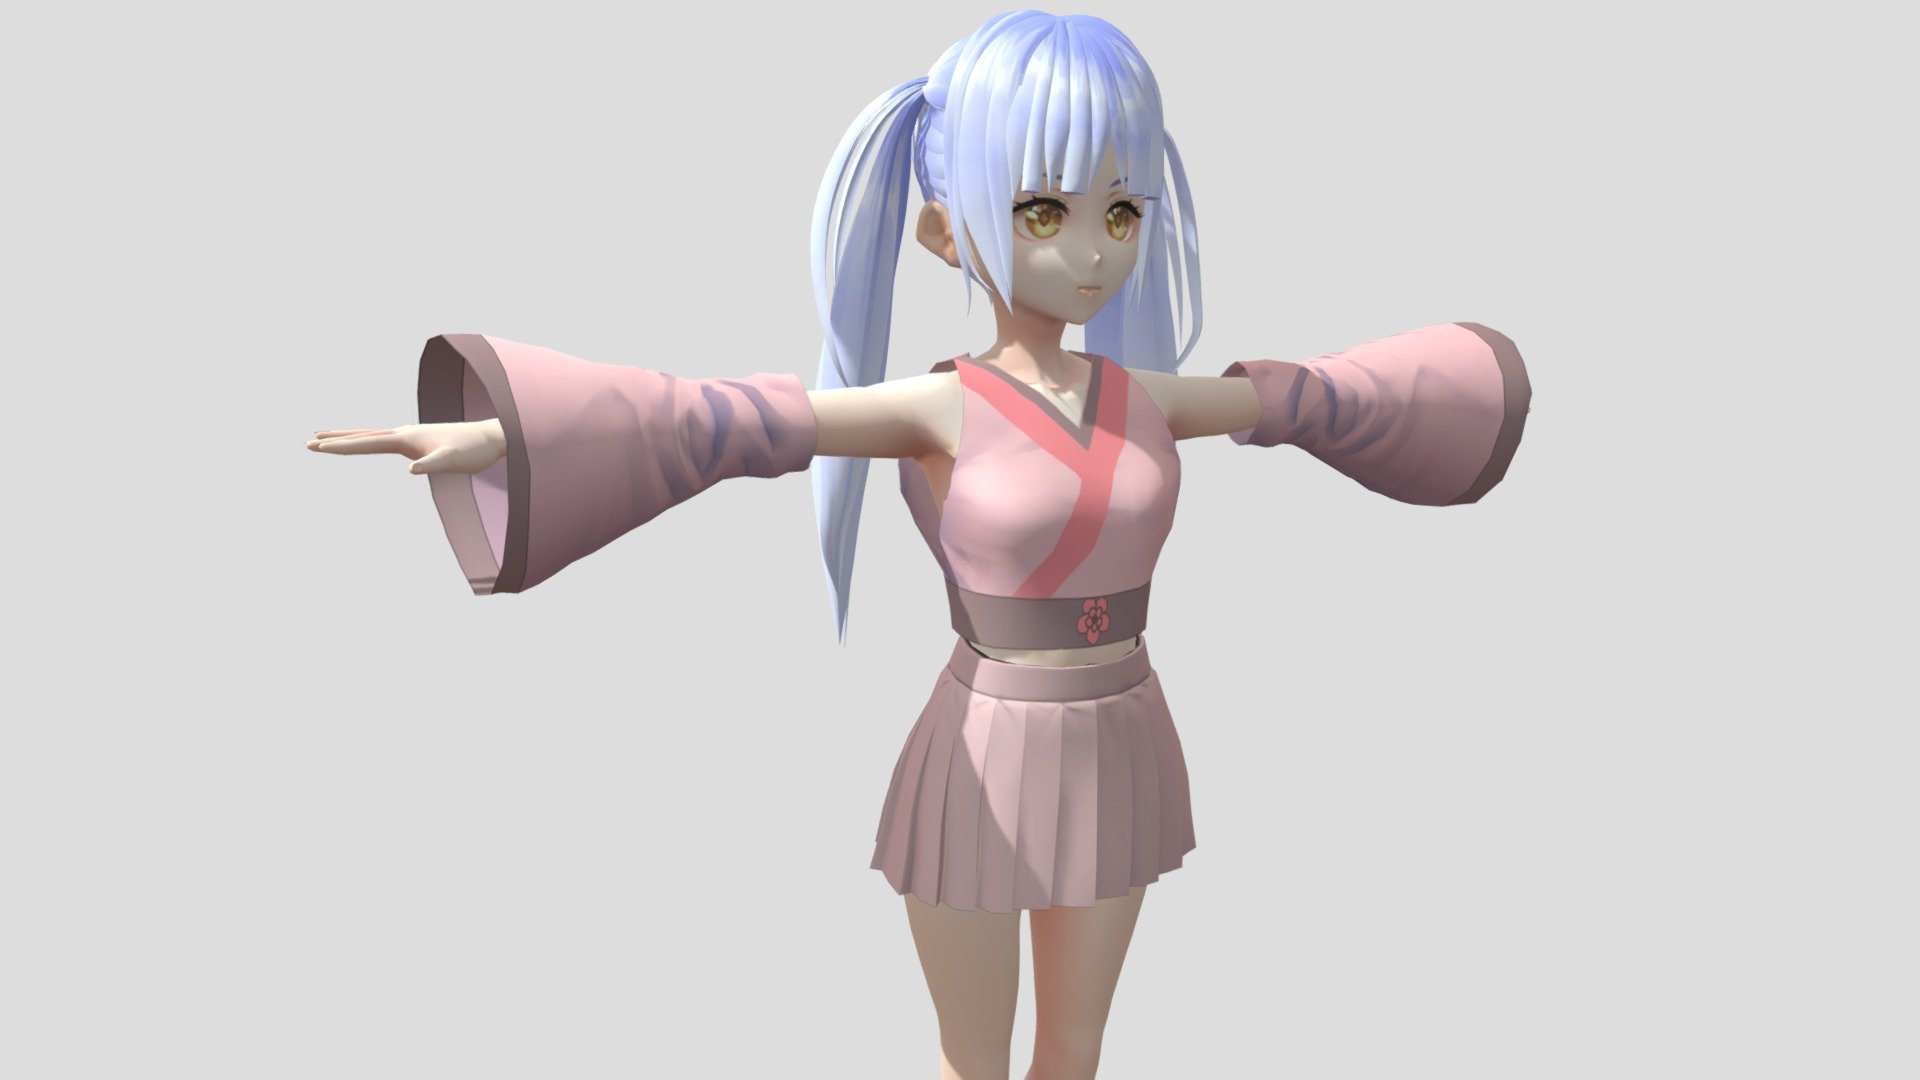 Model preview



This character model belongs to Japanese anime style, all models has been converted into fbx file using blender, users can add their favorite animations on mixamo website, then apply to unity versions above 2019



Character : Suzuran

Verts:20765

Tris:29522

Fourteen textures for the character



This package contains VRM files, which can make the character module more refined, please refer to the manual for details



▶Commercial use allowed

▶Forbid secondary sales



Welcome add my website to credit :

Sketchfab

Pixiv

VRoidHub
 - 【Anime Character / alex94i60】Suzuran (V2) - Buy Royalty Free 3D model by 3D動漫風角色屋 / 3D Anime Character Store (@alex94i60) 3d model